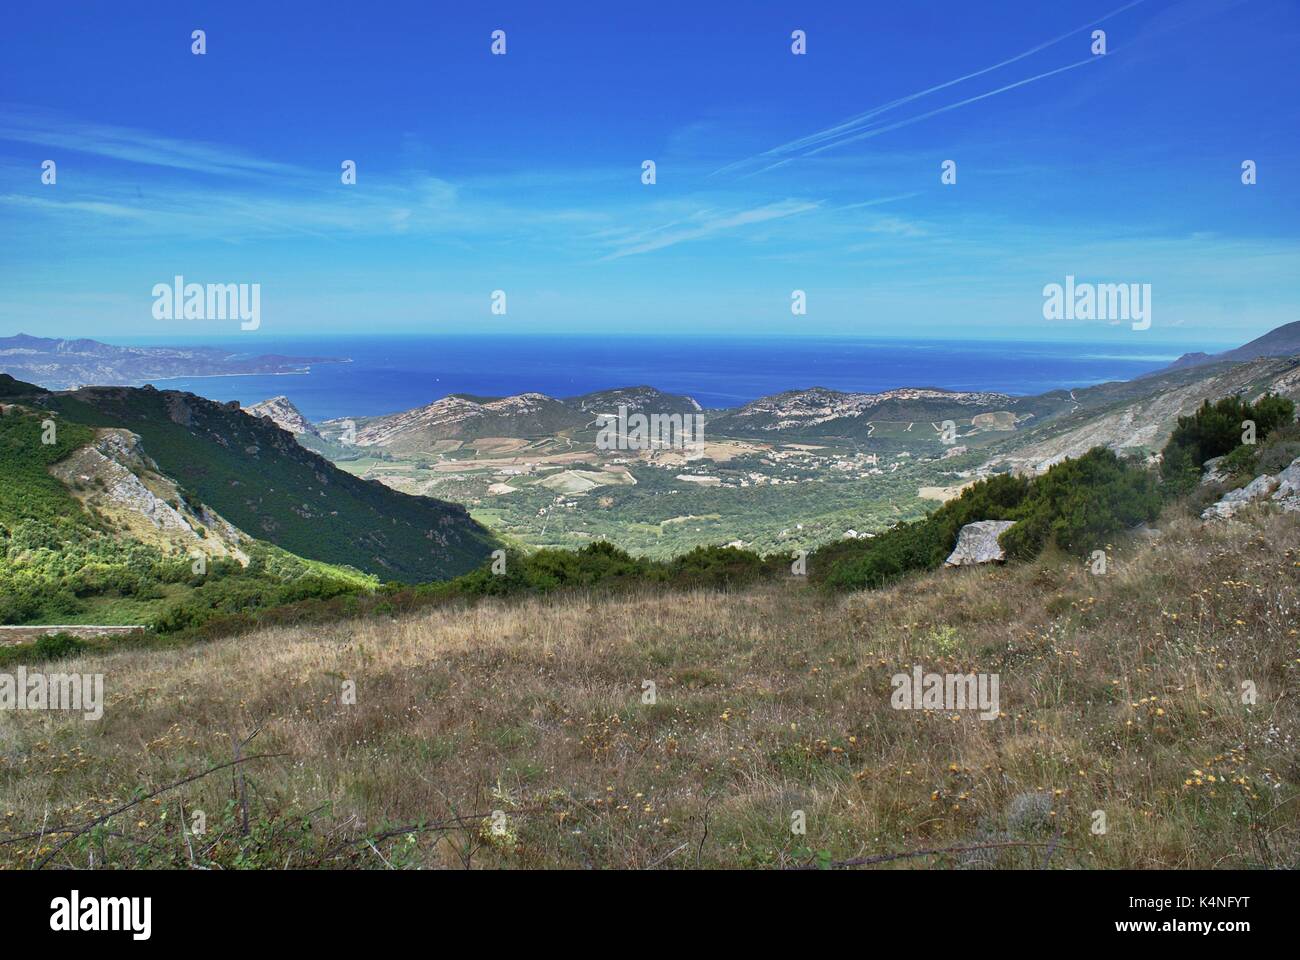 View of Mediterranean sea from North Corsica mountains Stock Photo